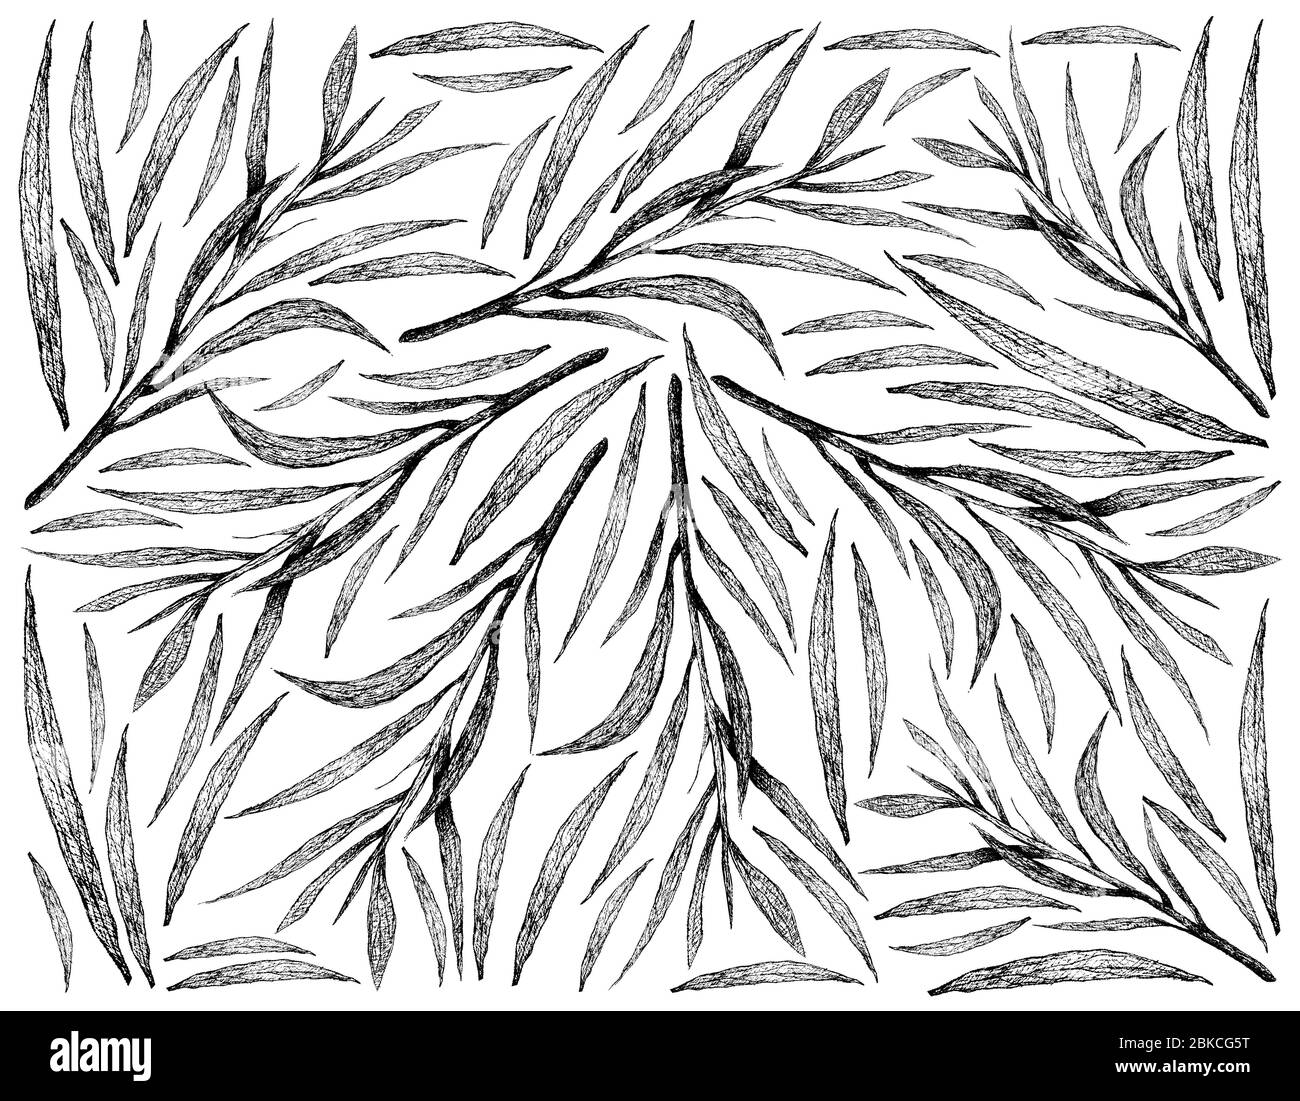 Herbal Plants, Hand Drawn Illustration Background of Fresh Tarragon, Estragon and Artemisia Dracunculus Plants Used for Seasoning in Cooking. Stock Photo